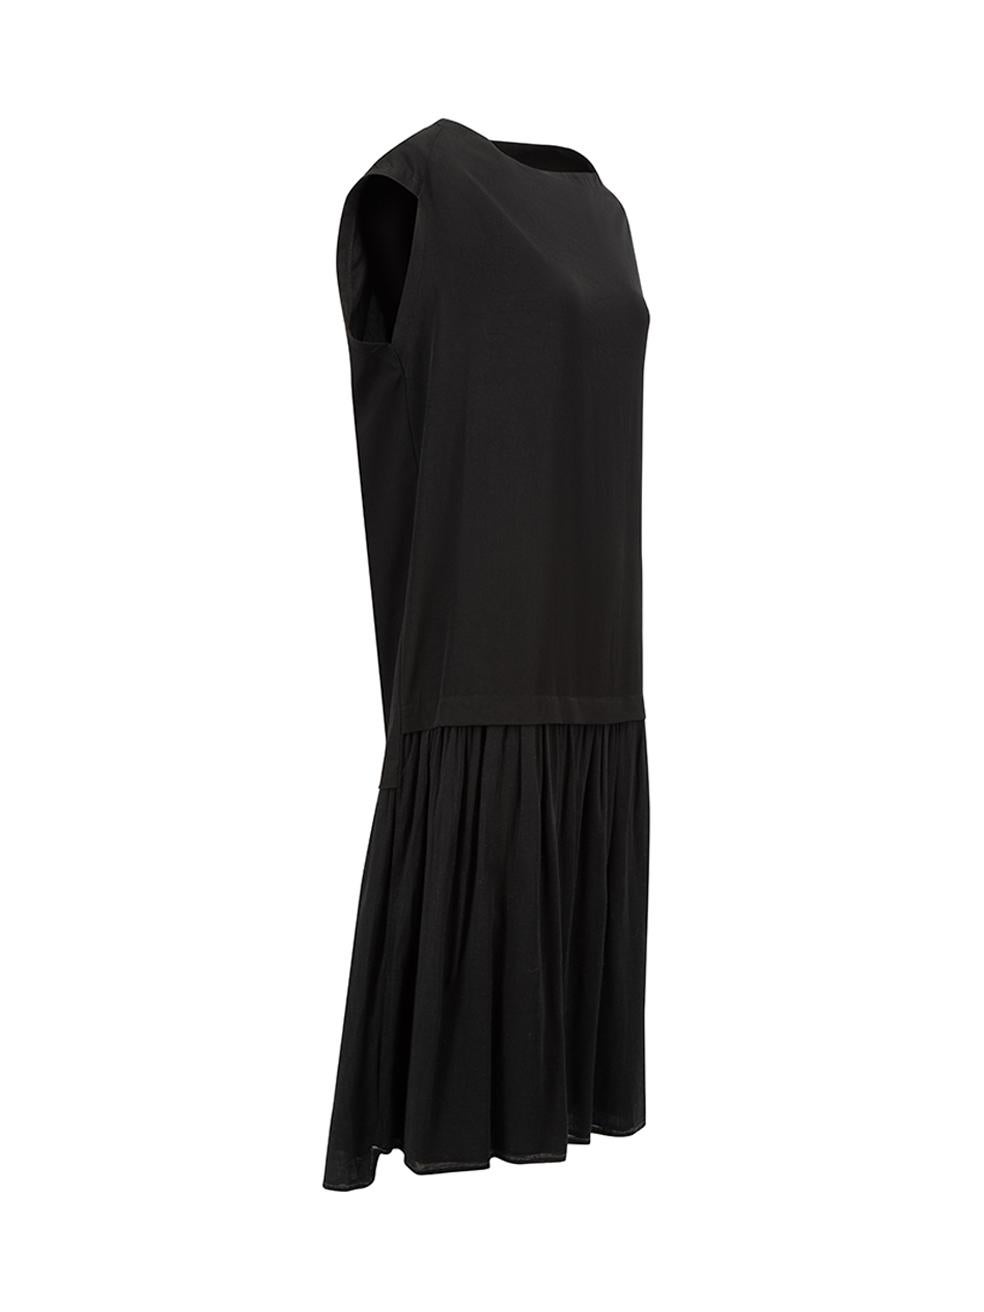 CONDITION is Very good. Hardly any visible wear to dress is evident though some loose threads are seen at hem on this used Y's designer resale item.



Details


Black

Synthetic

Midi dress

Oversized fit

Sleeveless

Square neckline

1x Side